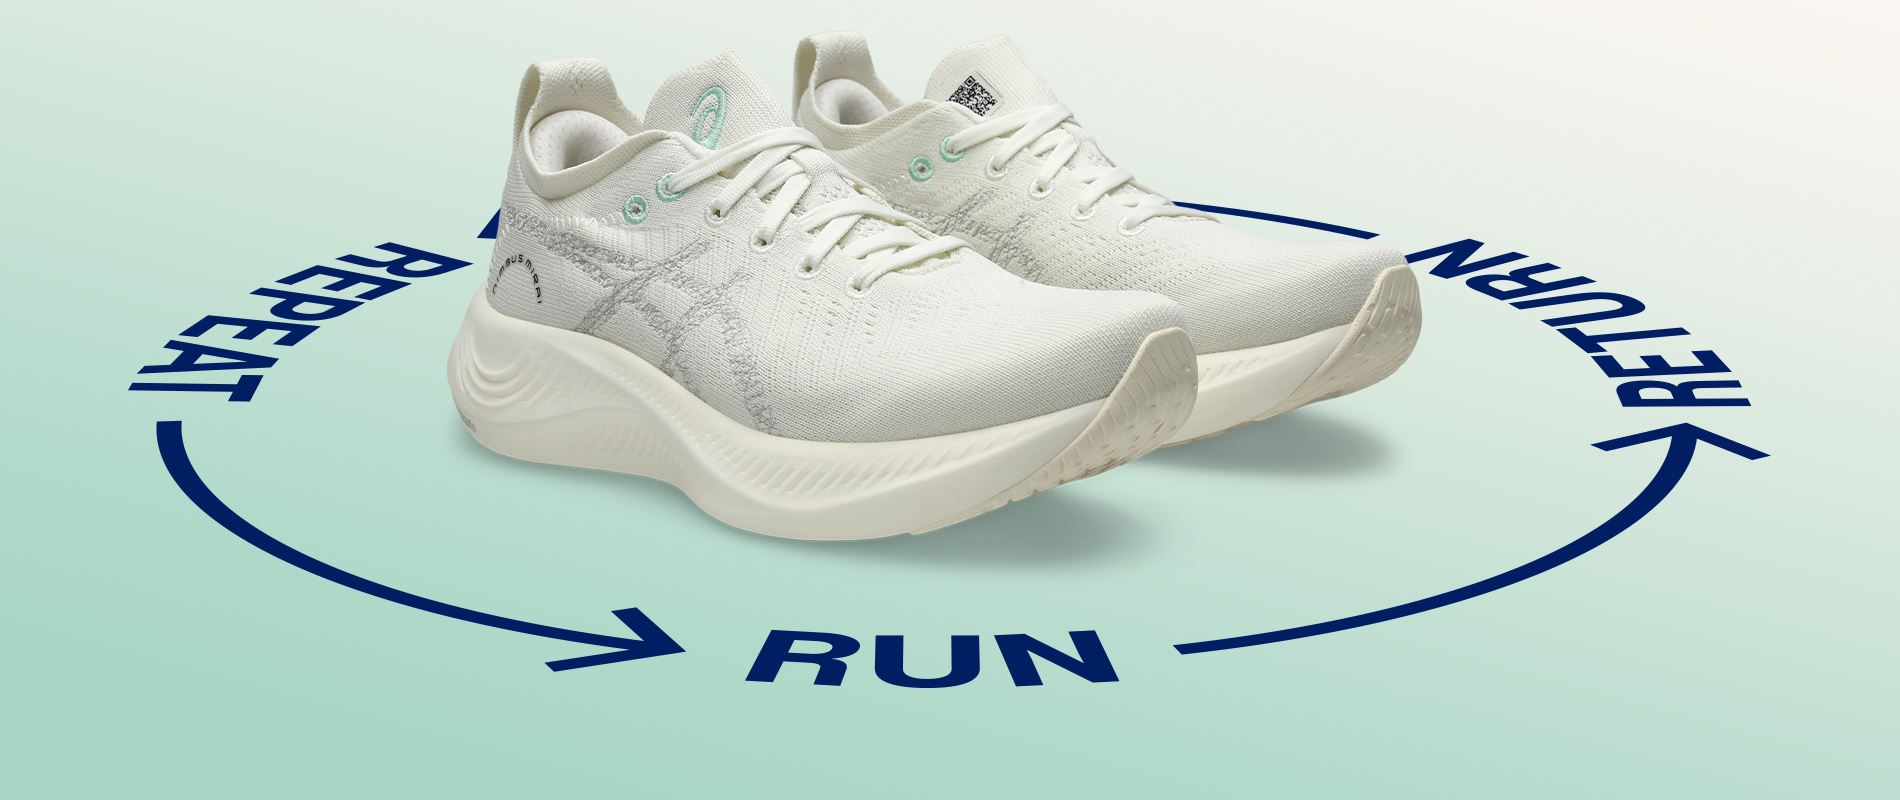 Made to be returned ASICS announces the NIMBUS MIRAI running shoe its most circular shoe ever